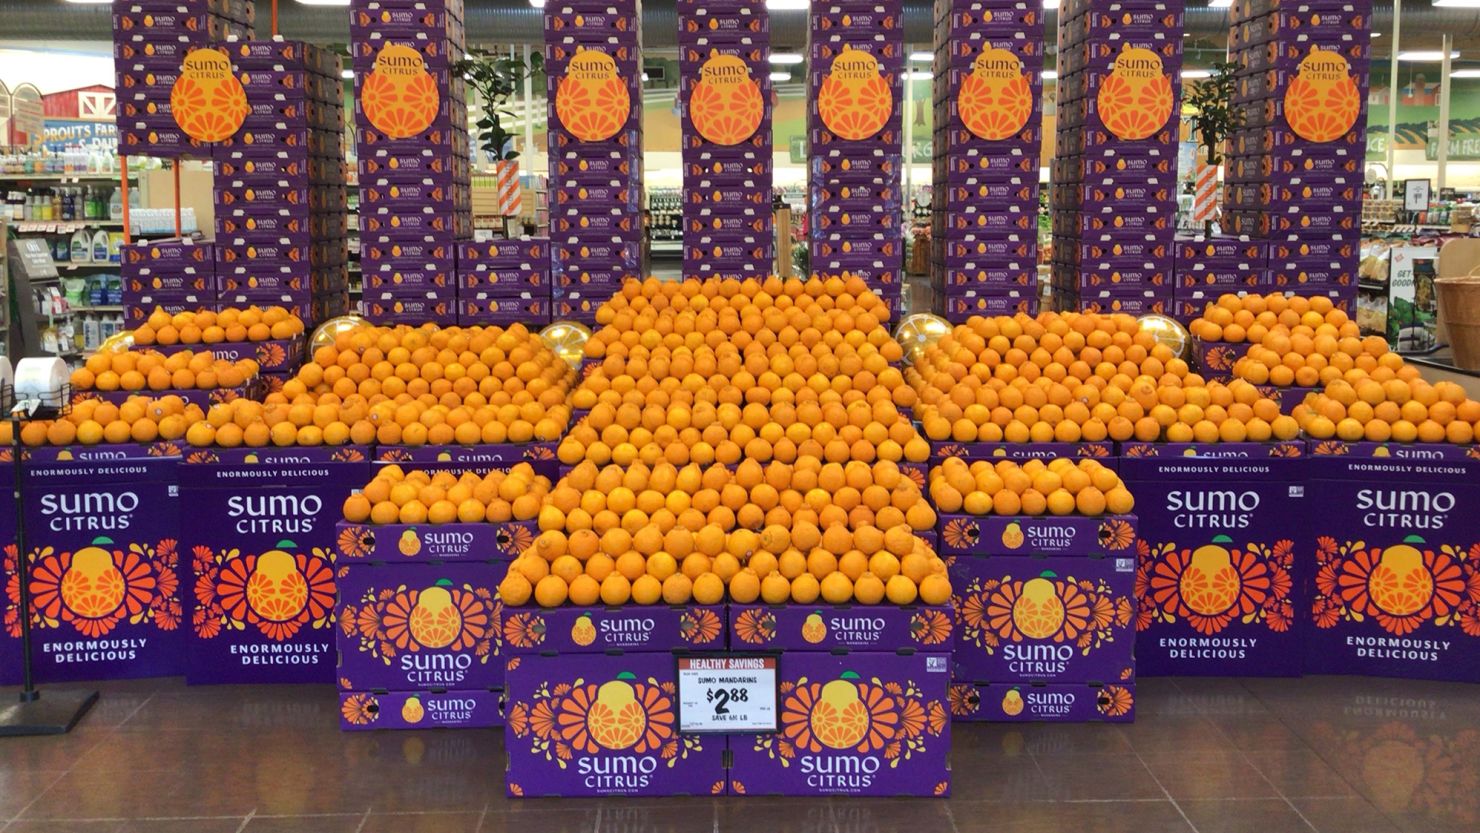 Sumo oranges are in season right now. What makes them so special?